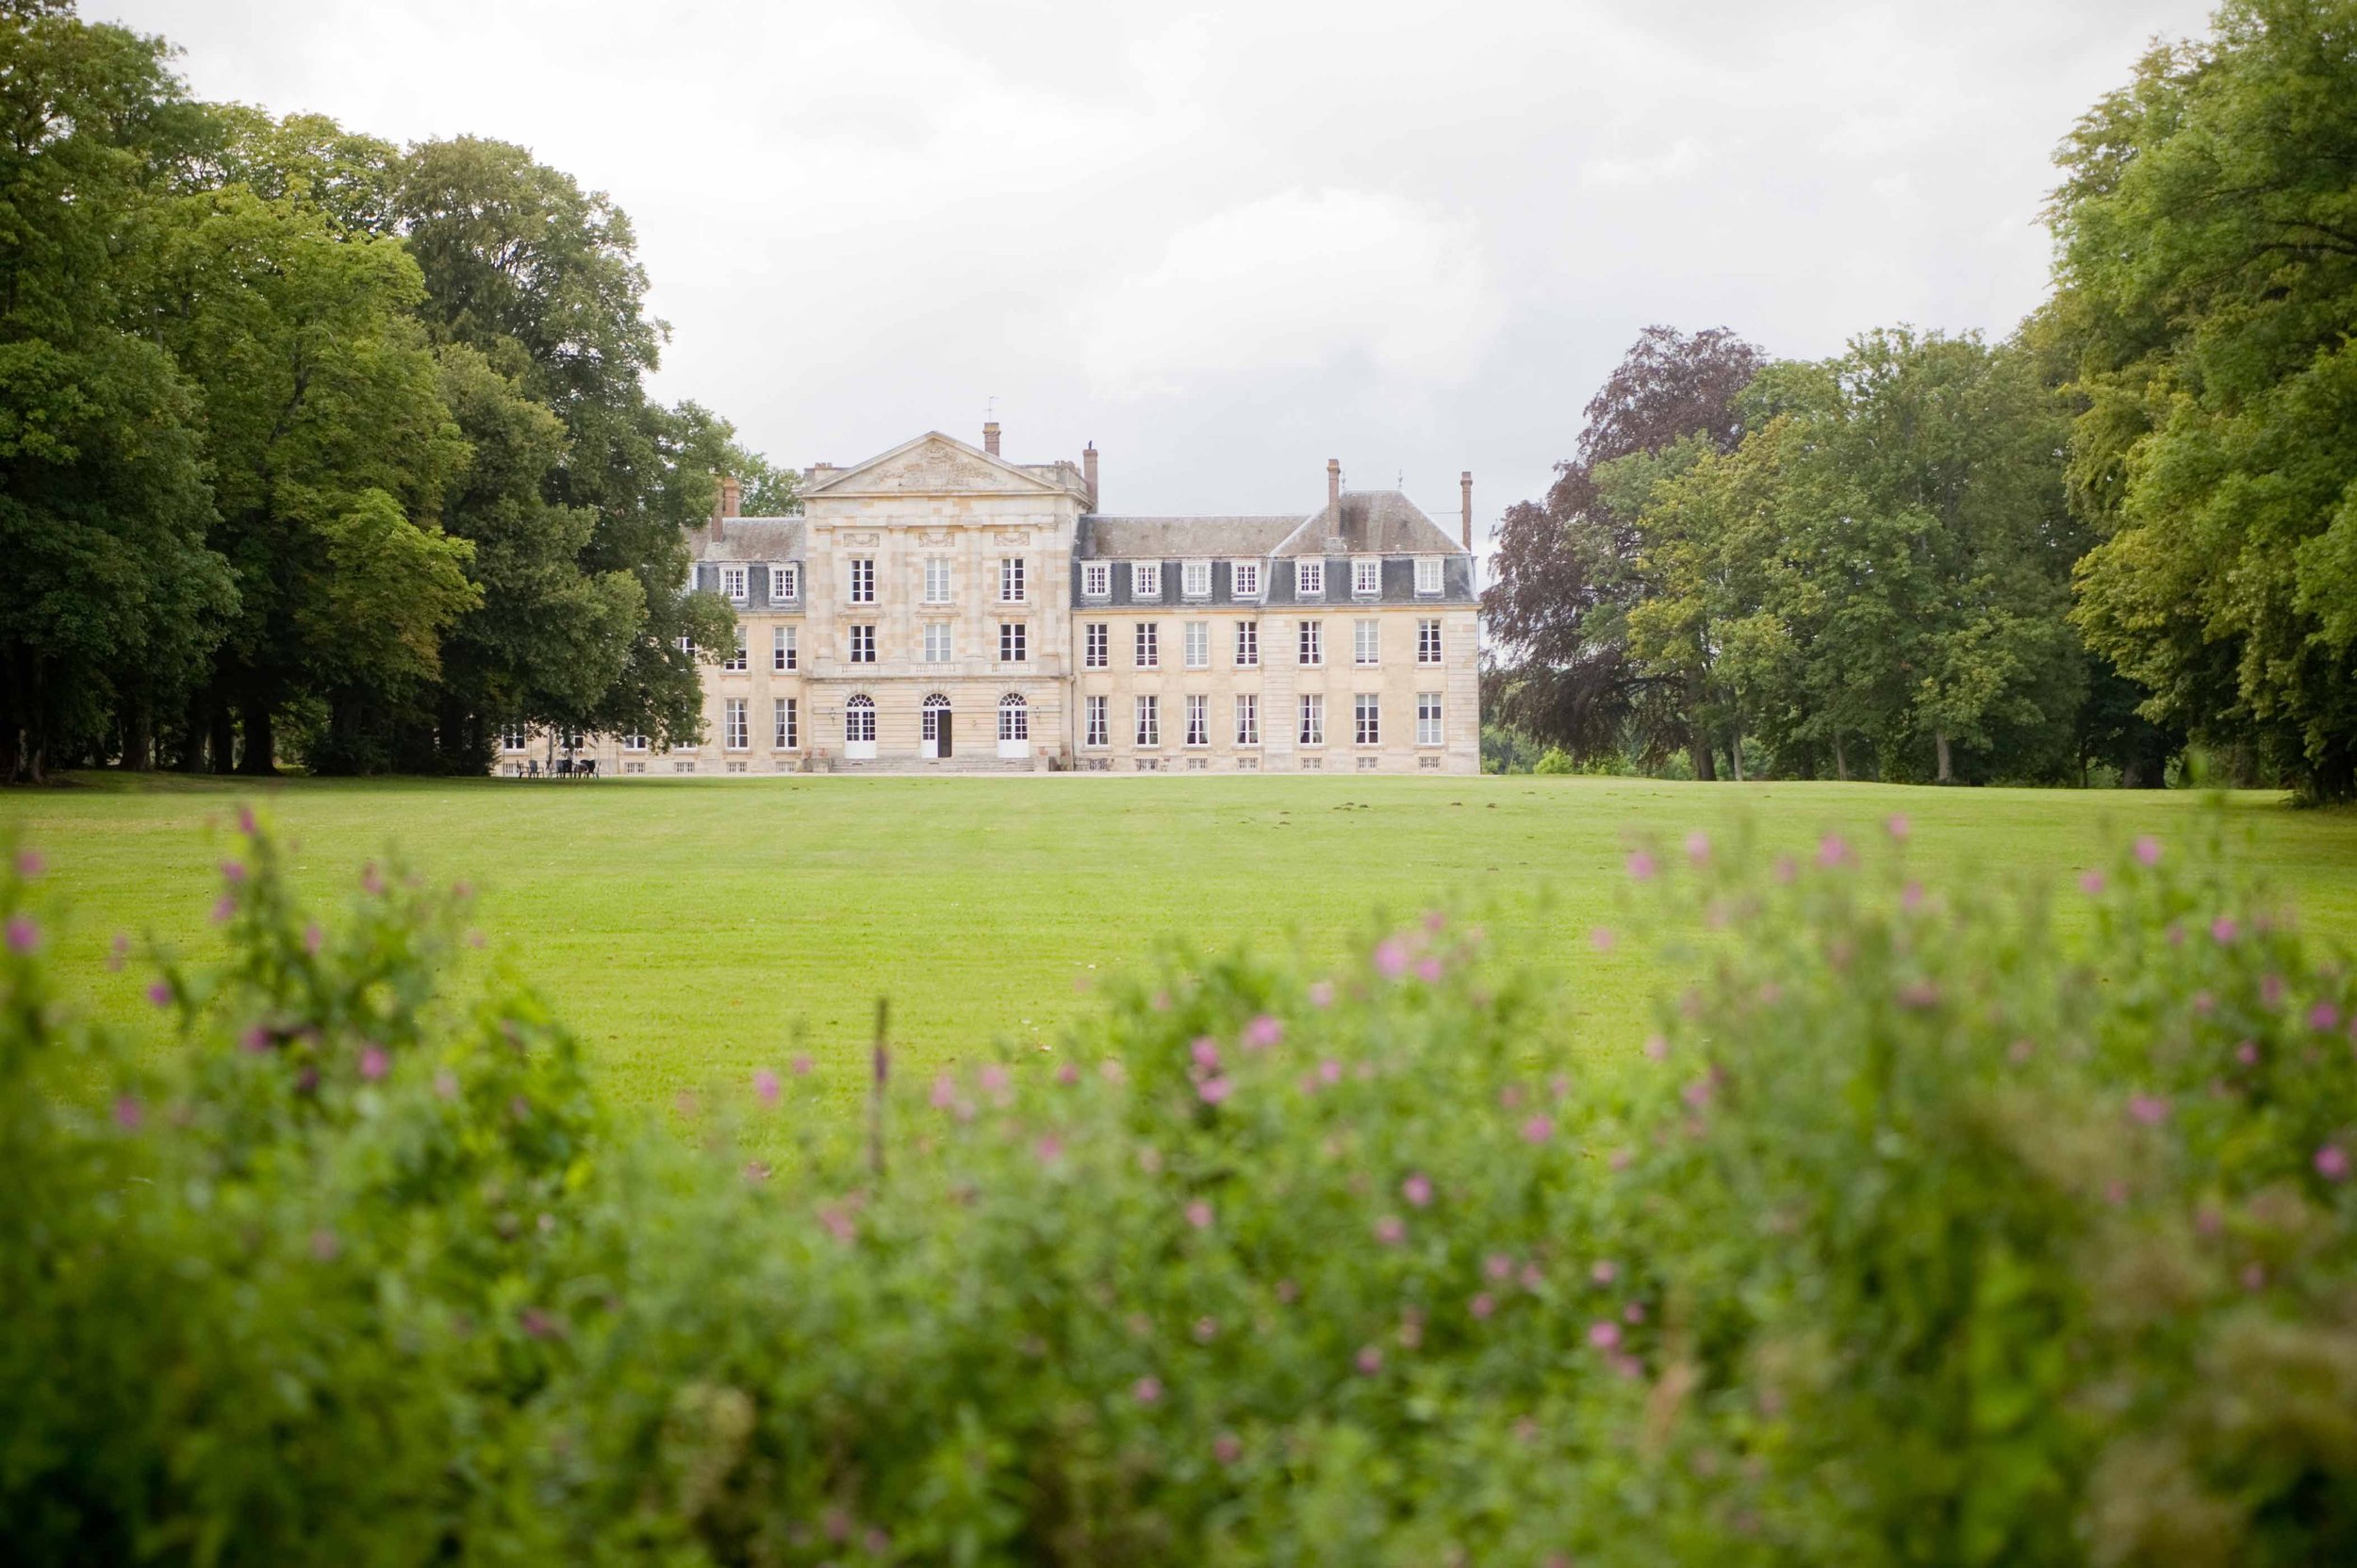 Chateau de Courtomer, a large French chateau available to hire, set in in 50 acres of lush parkland.